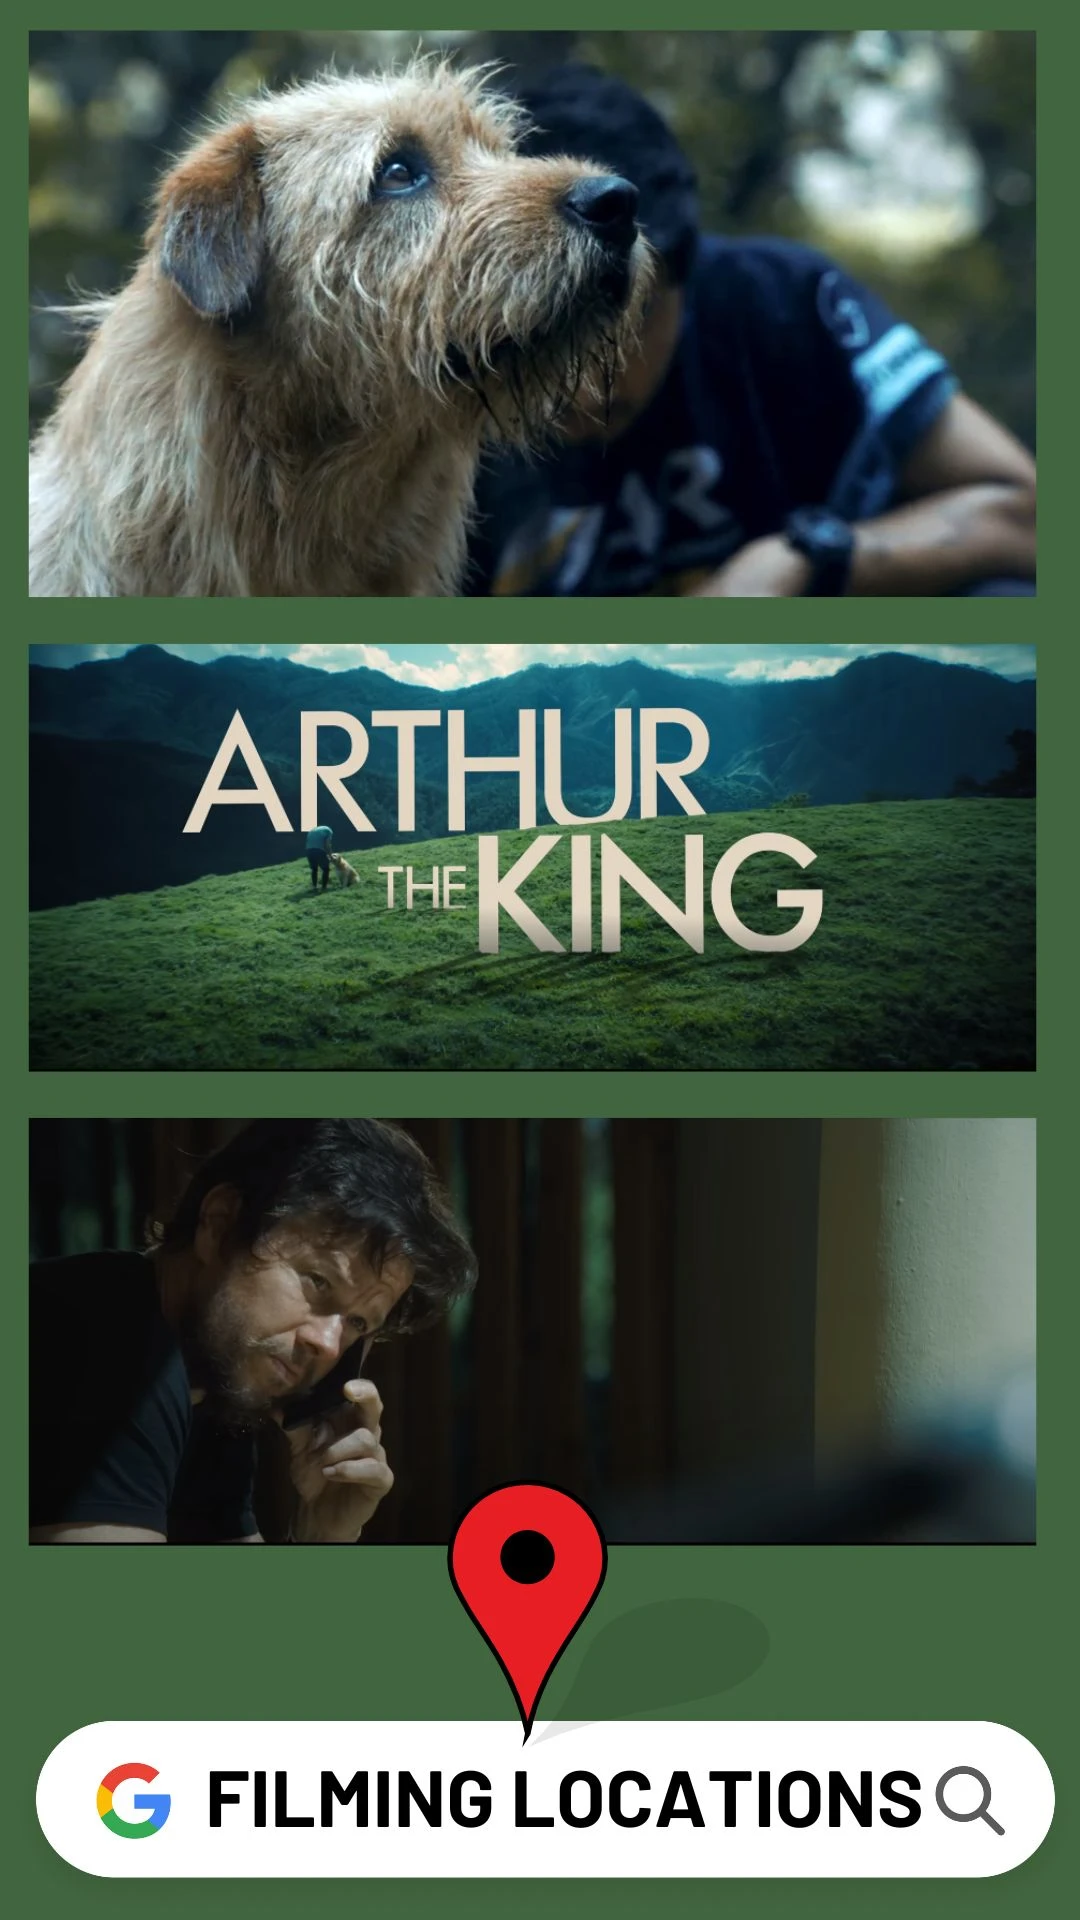 Arthur the King Filming Locations